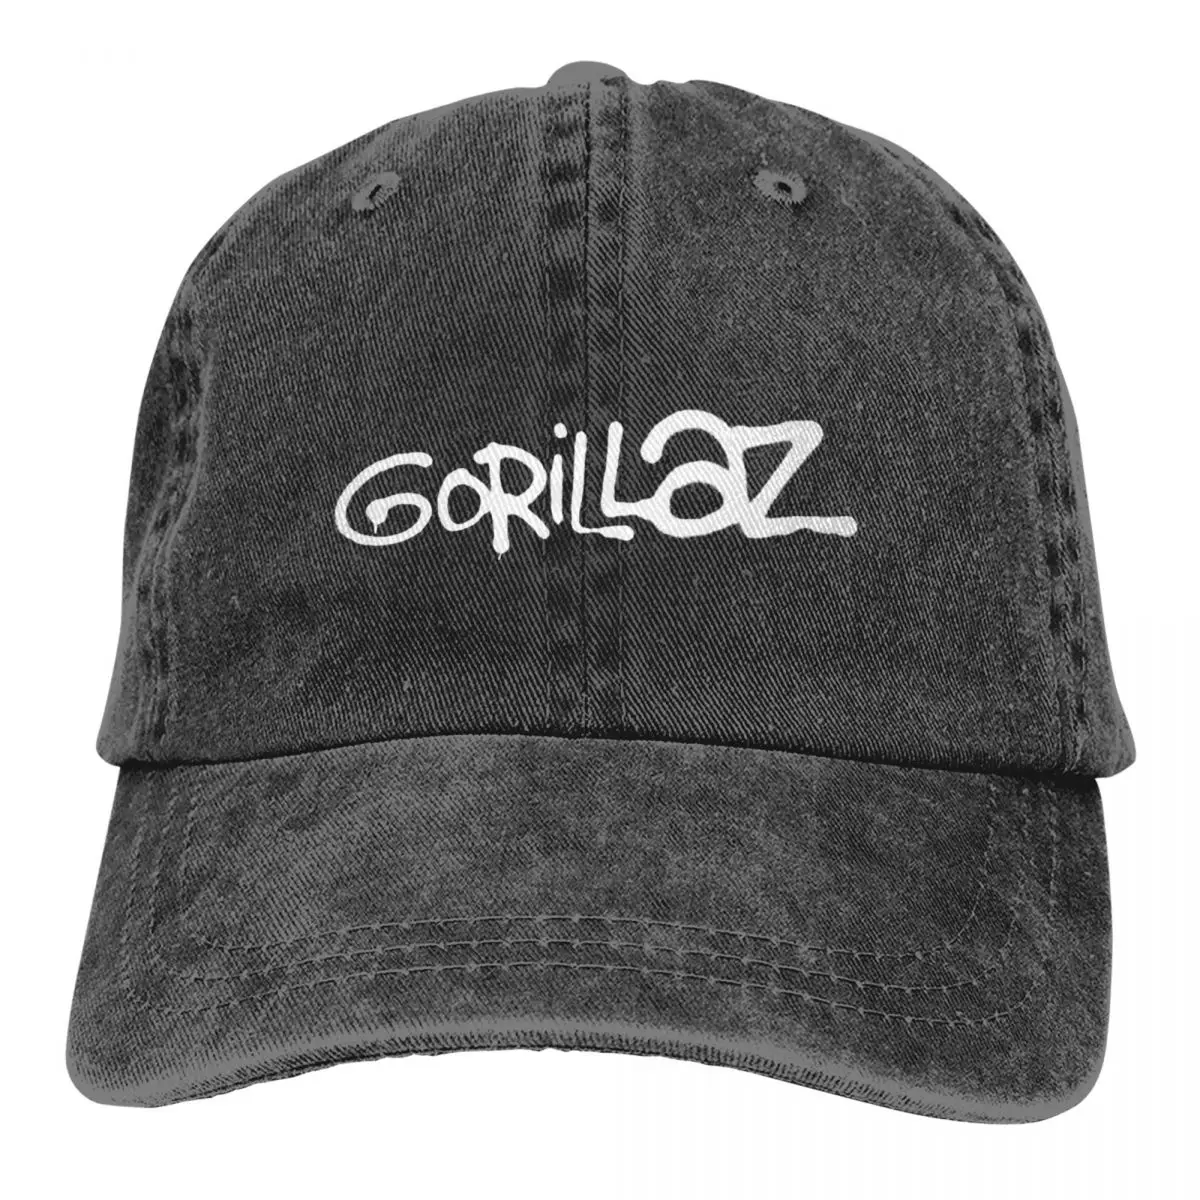 

Gorillaz Band Merch Unisex Style Baseball Cap Vintage Distressed Washed Caps Hat Casual Outdoor Summer Soft Snapback Hat